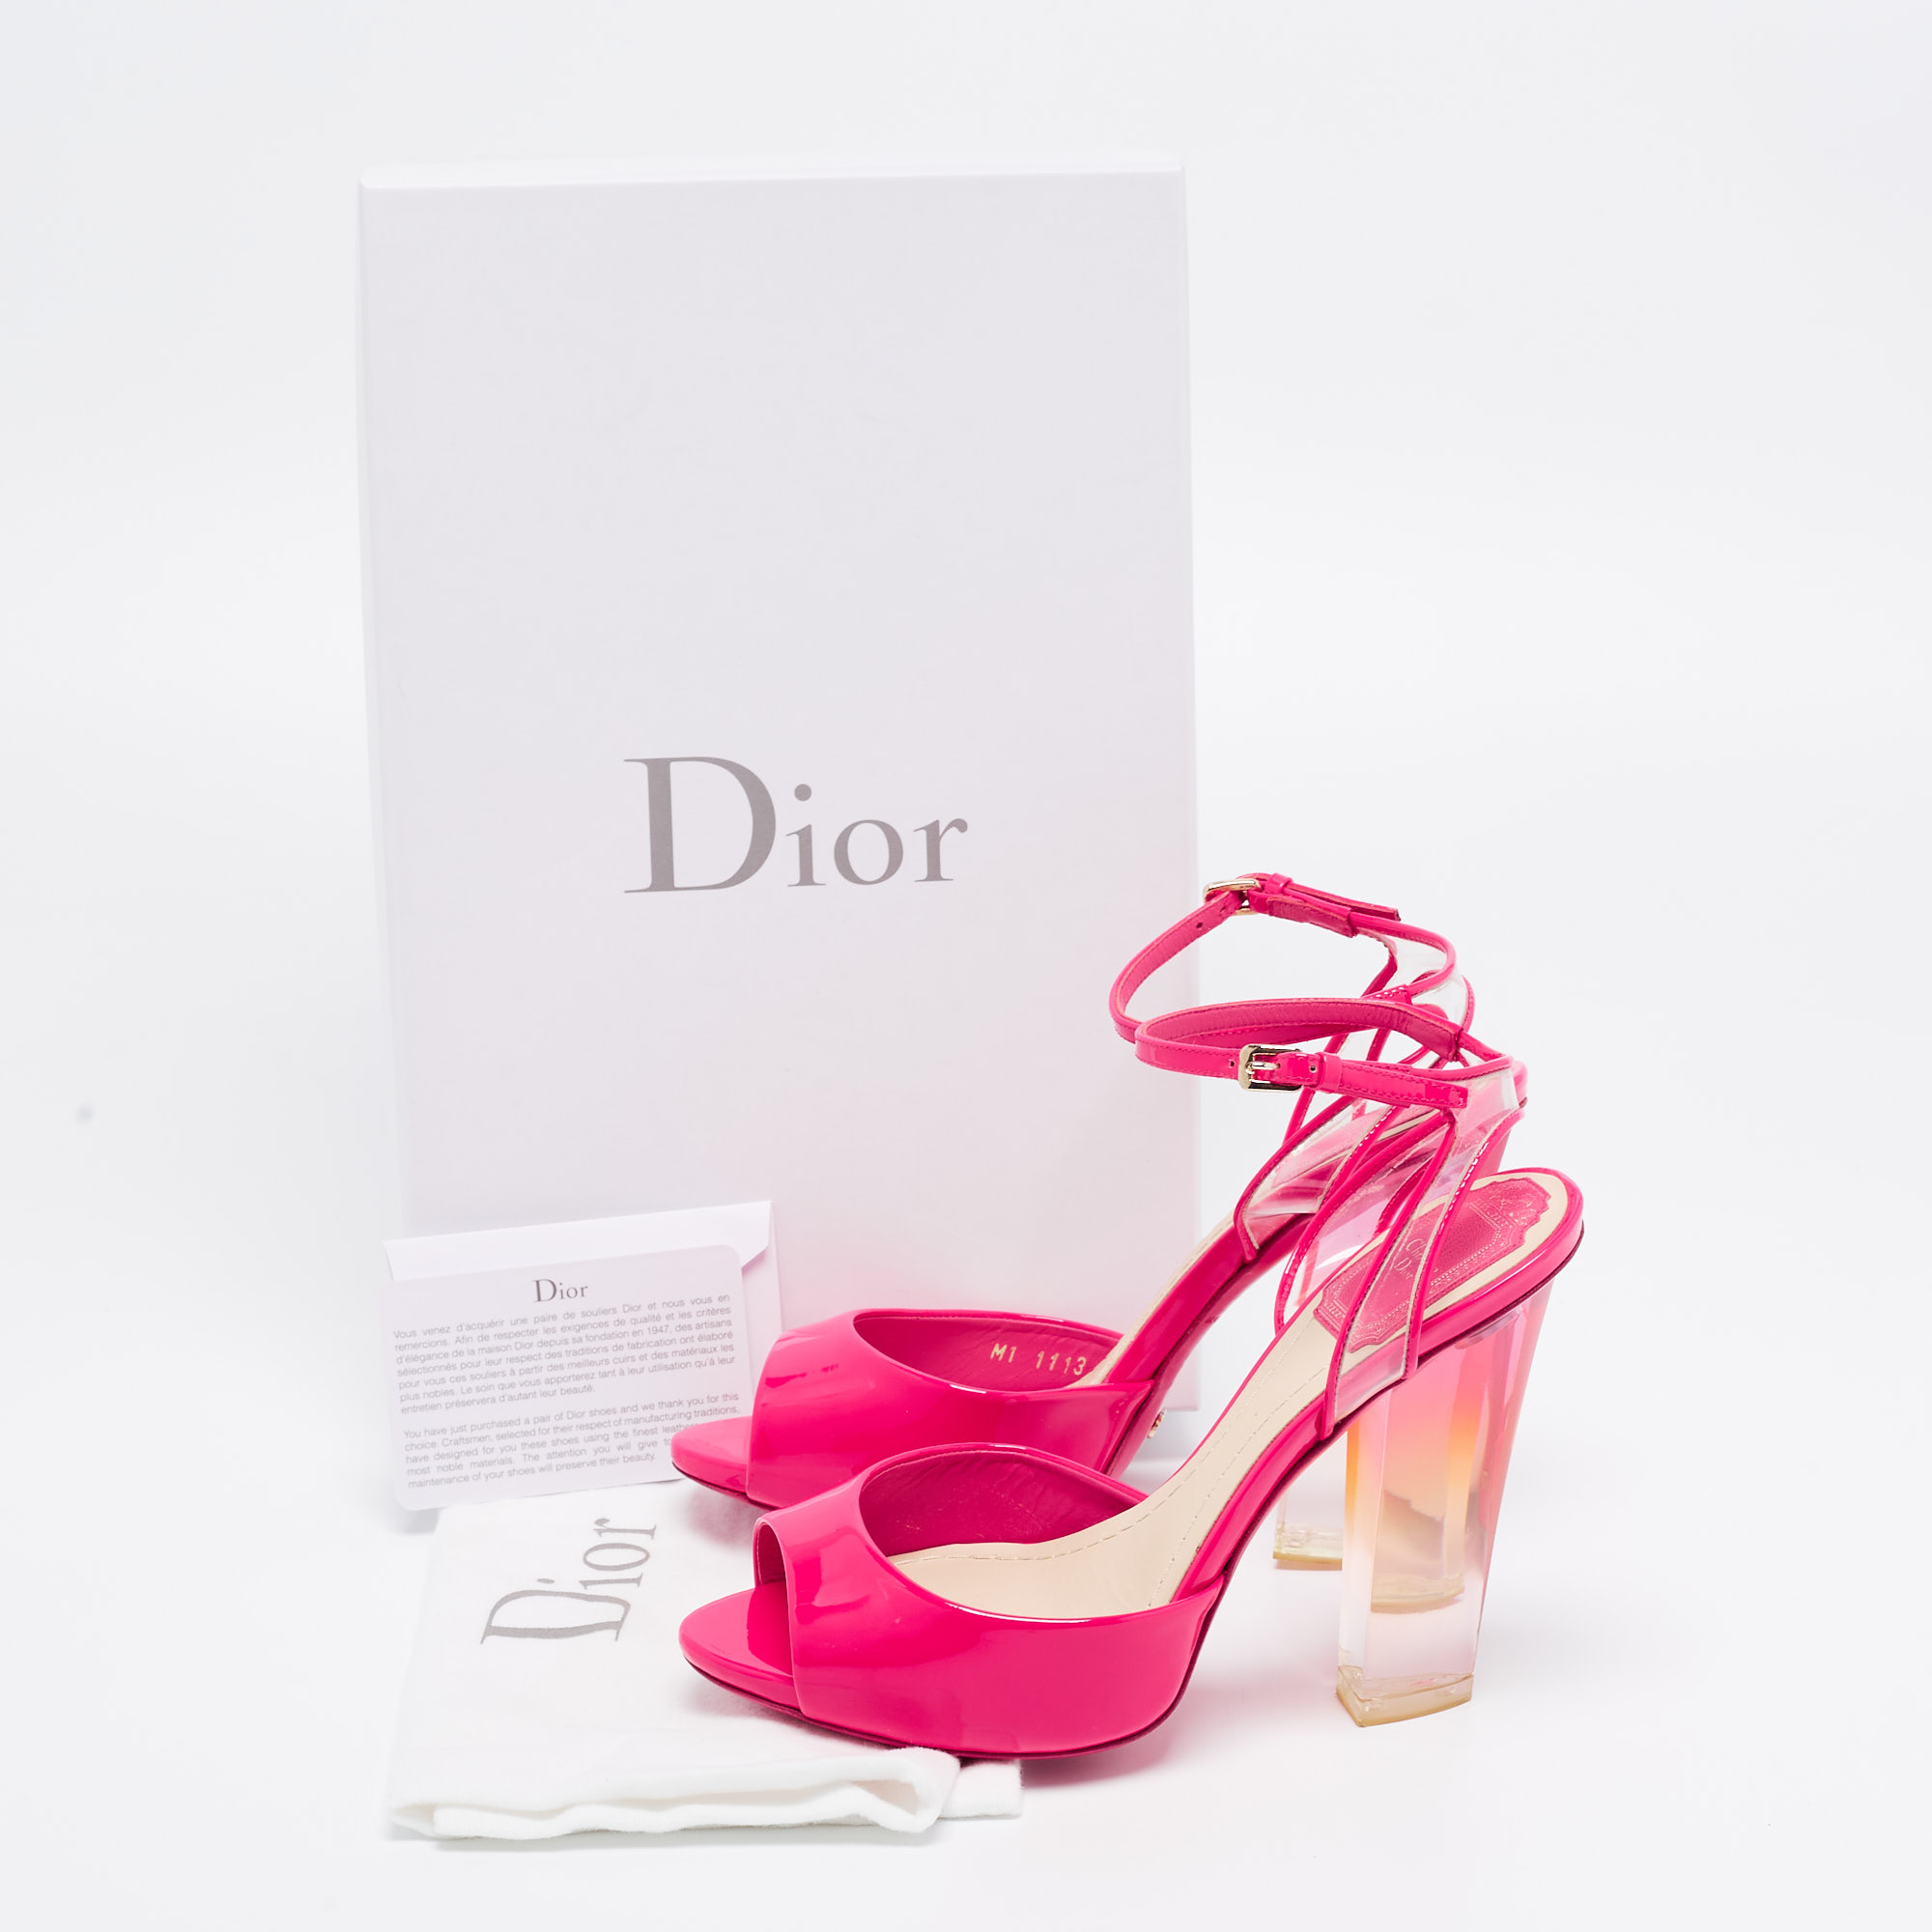 Dior Pink Patent Leather And PVC Clear Block Heels Ankle-Strap Sandals Size 35